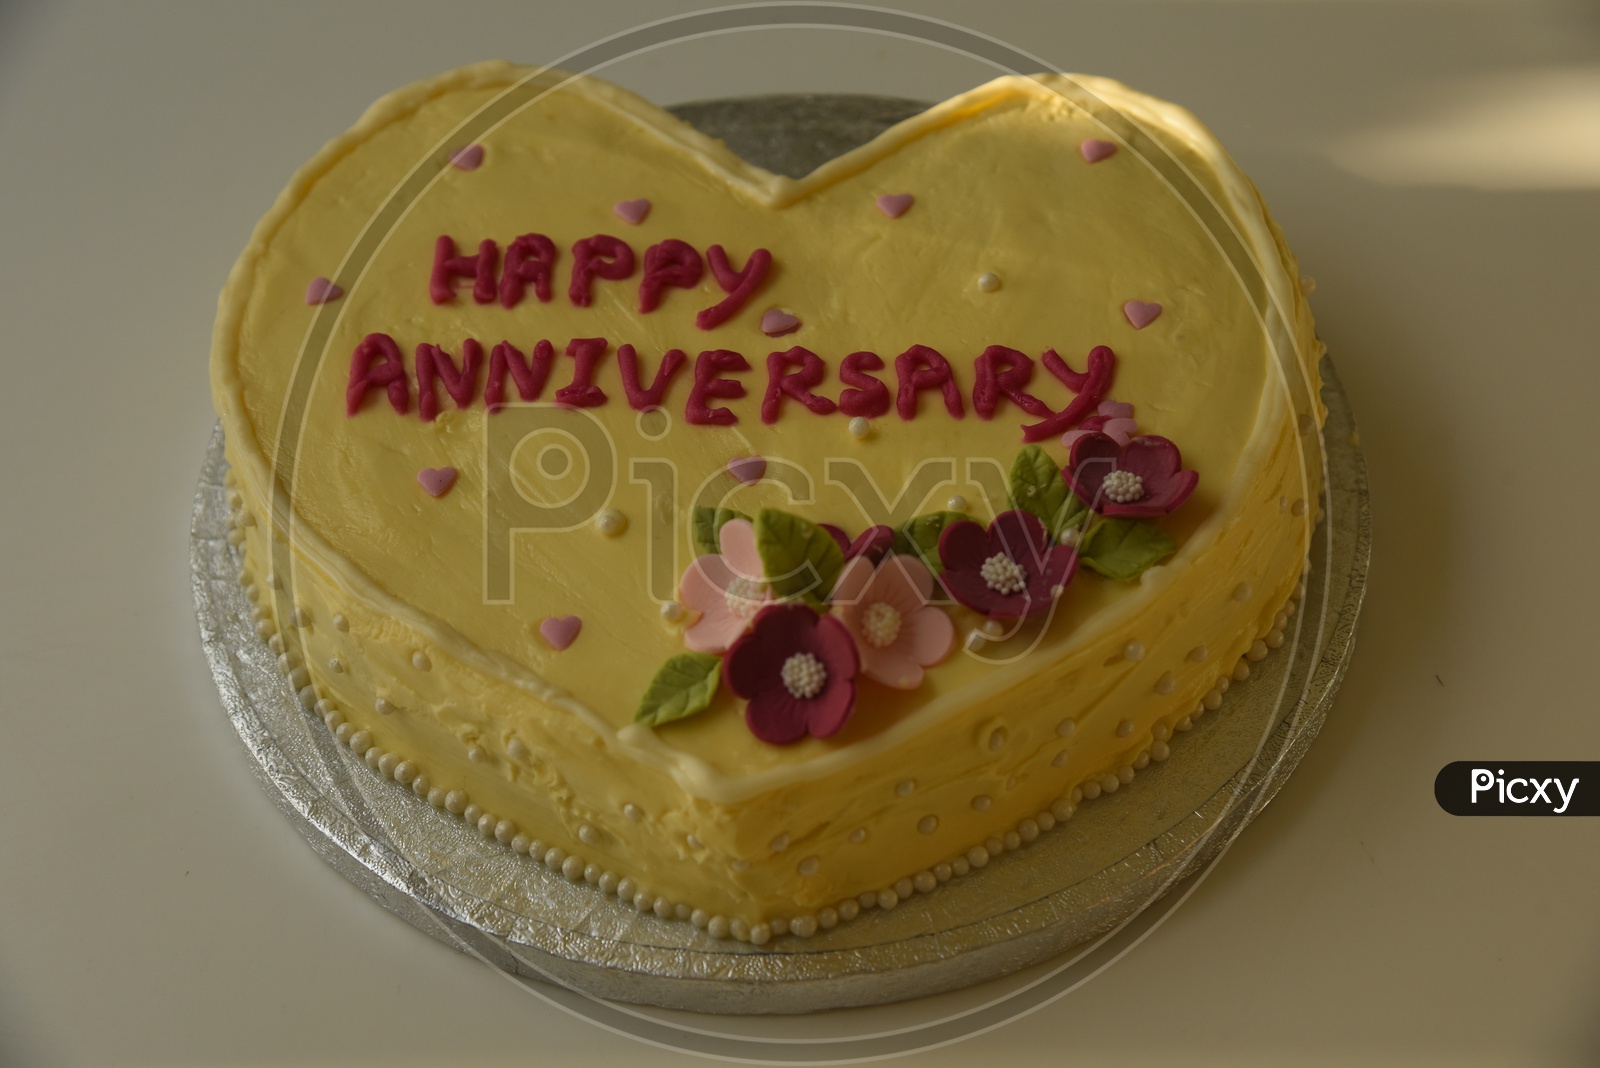 Cake with Happy Anniversary on it